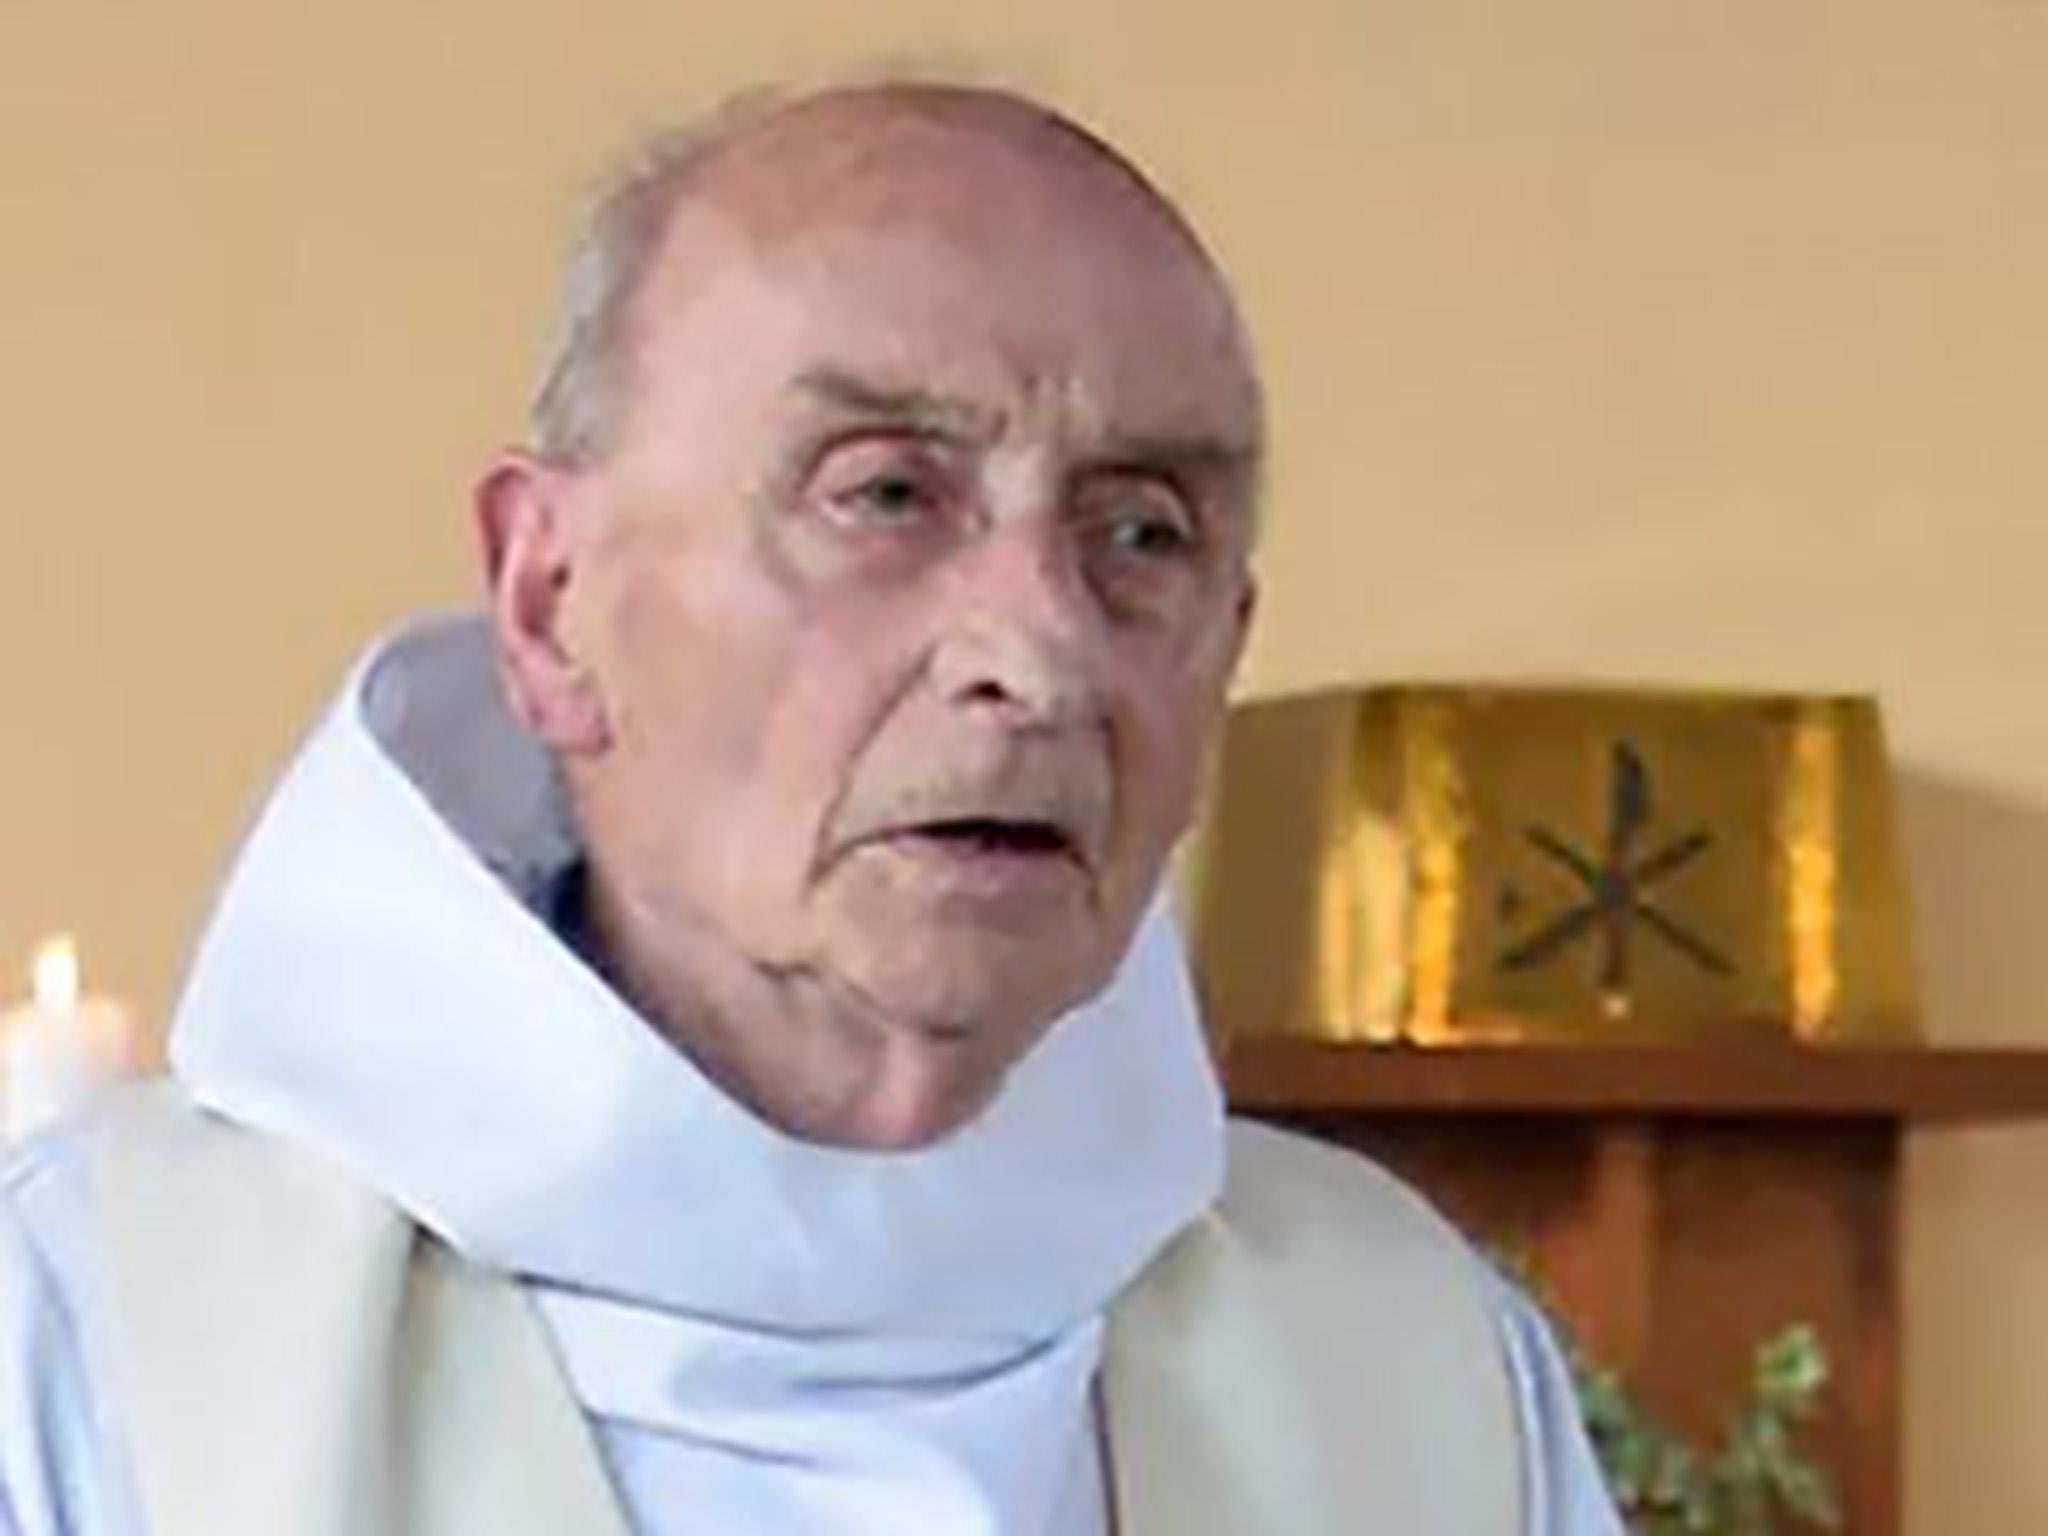 Father Jacques Hamel was murdered in his church in Rouen (AFP/Getty Images)